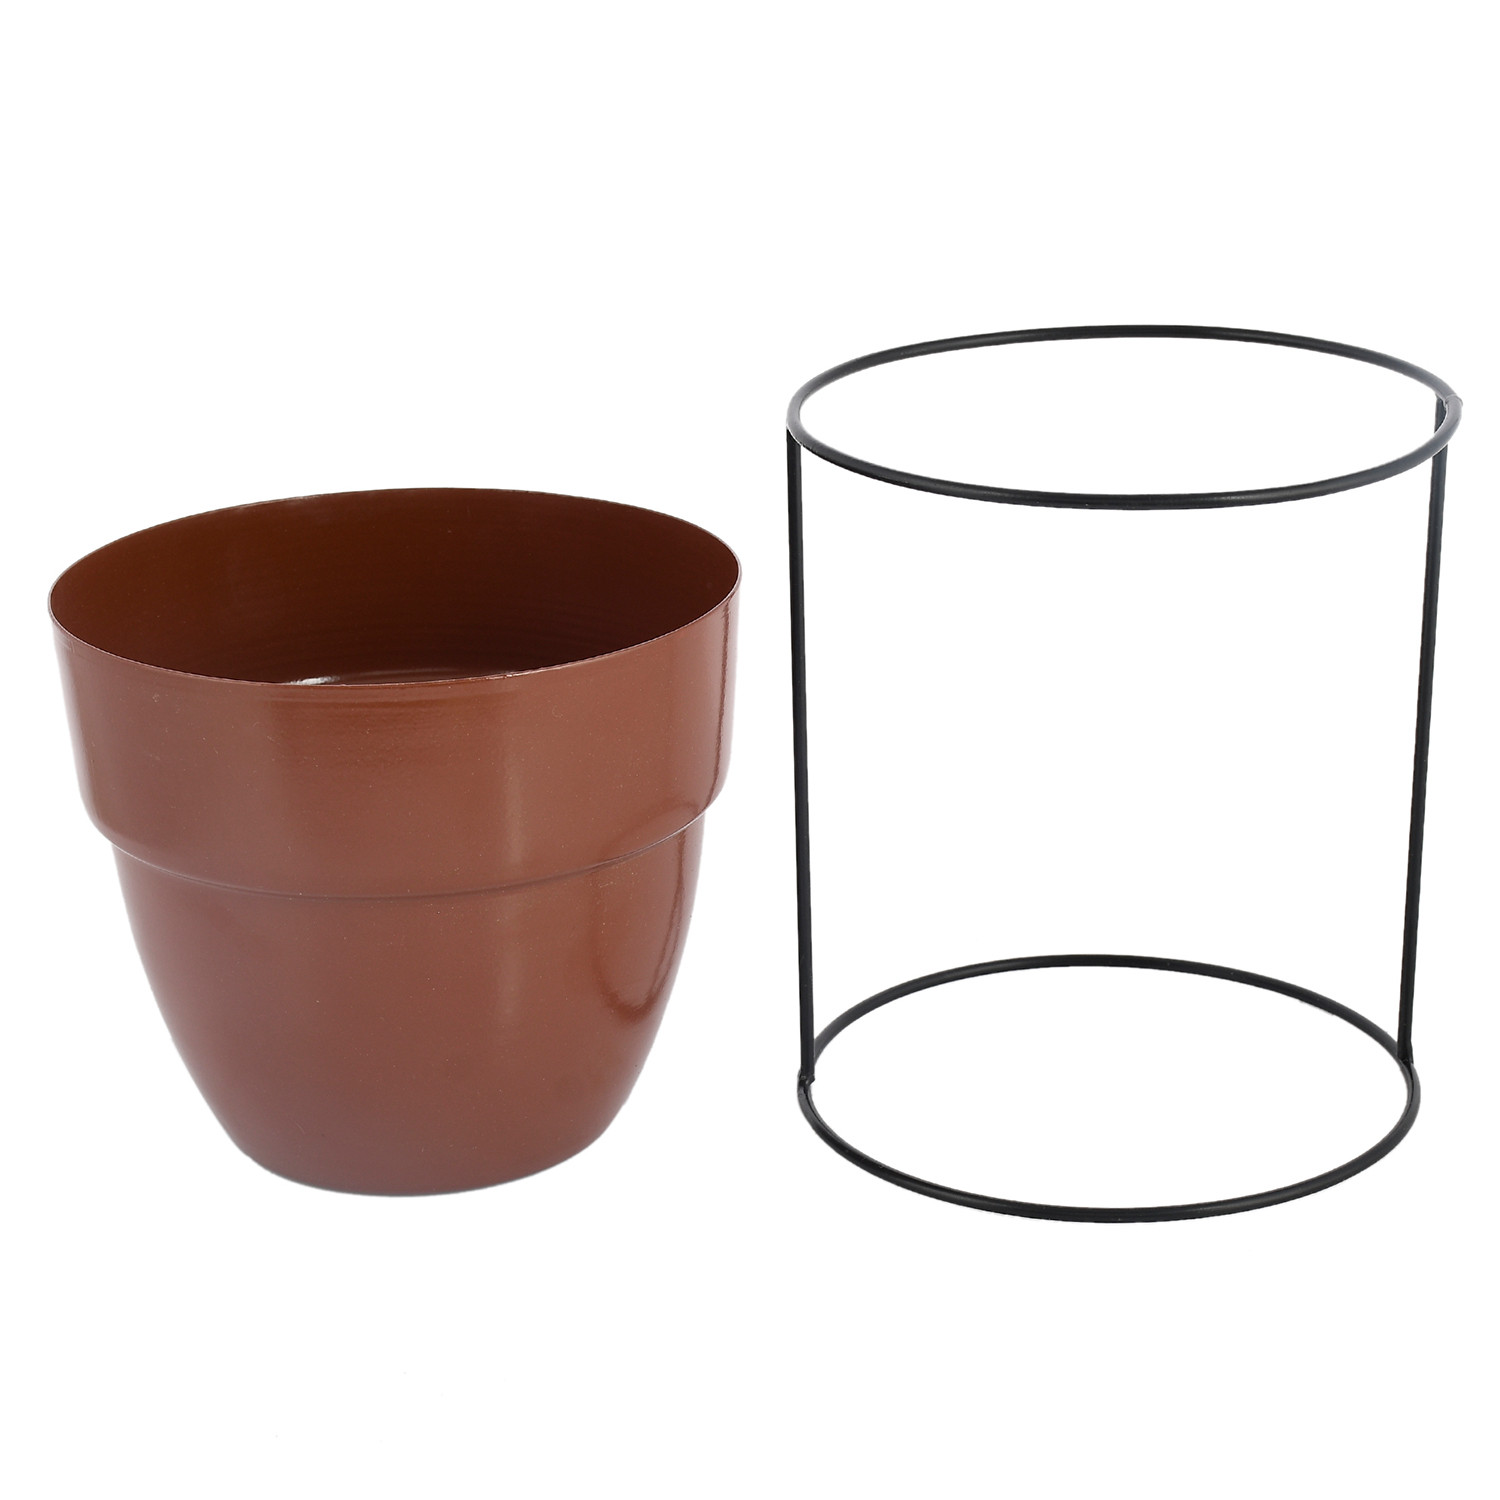 Kuber Industries Metal Planter|Decorative Modern Indoor Desk Pot|Iron Table Stand Flower Planter Pot For Home Décor,8.5 Inches,Pack of 2 (Green & Terracotta)